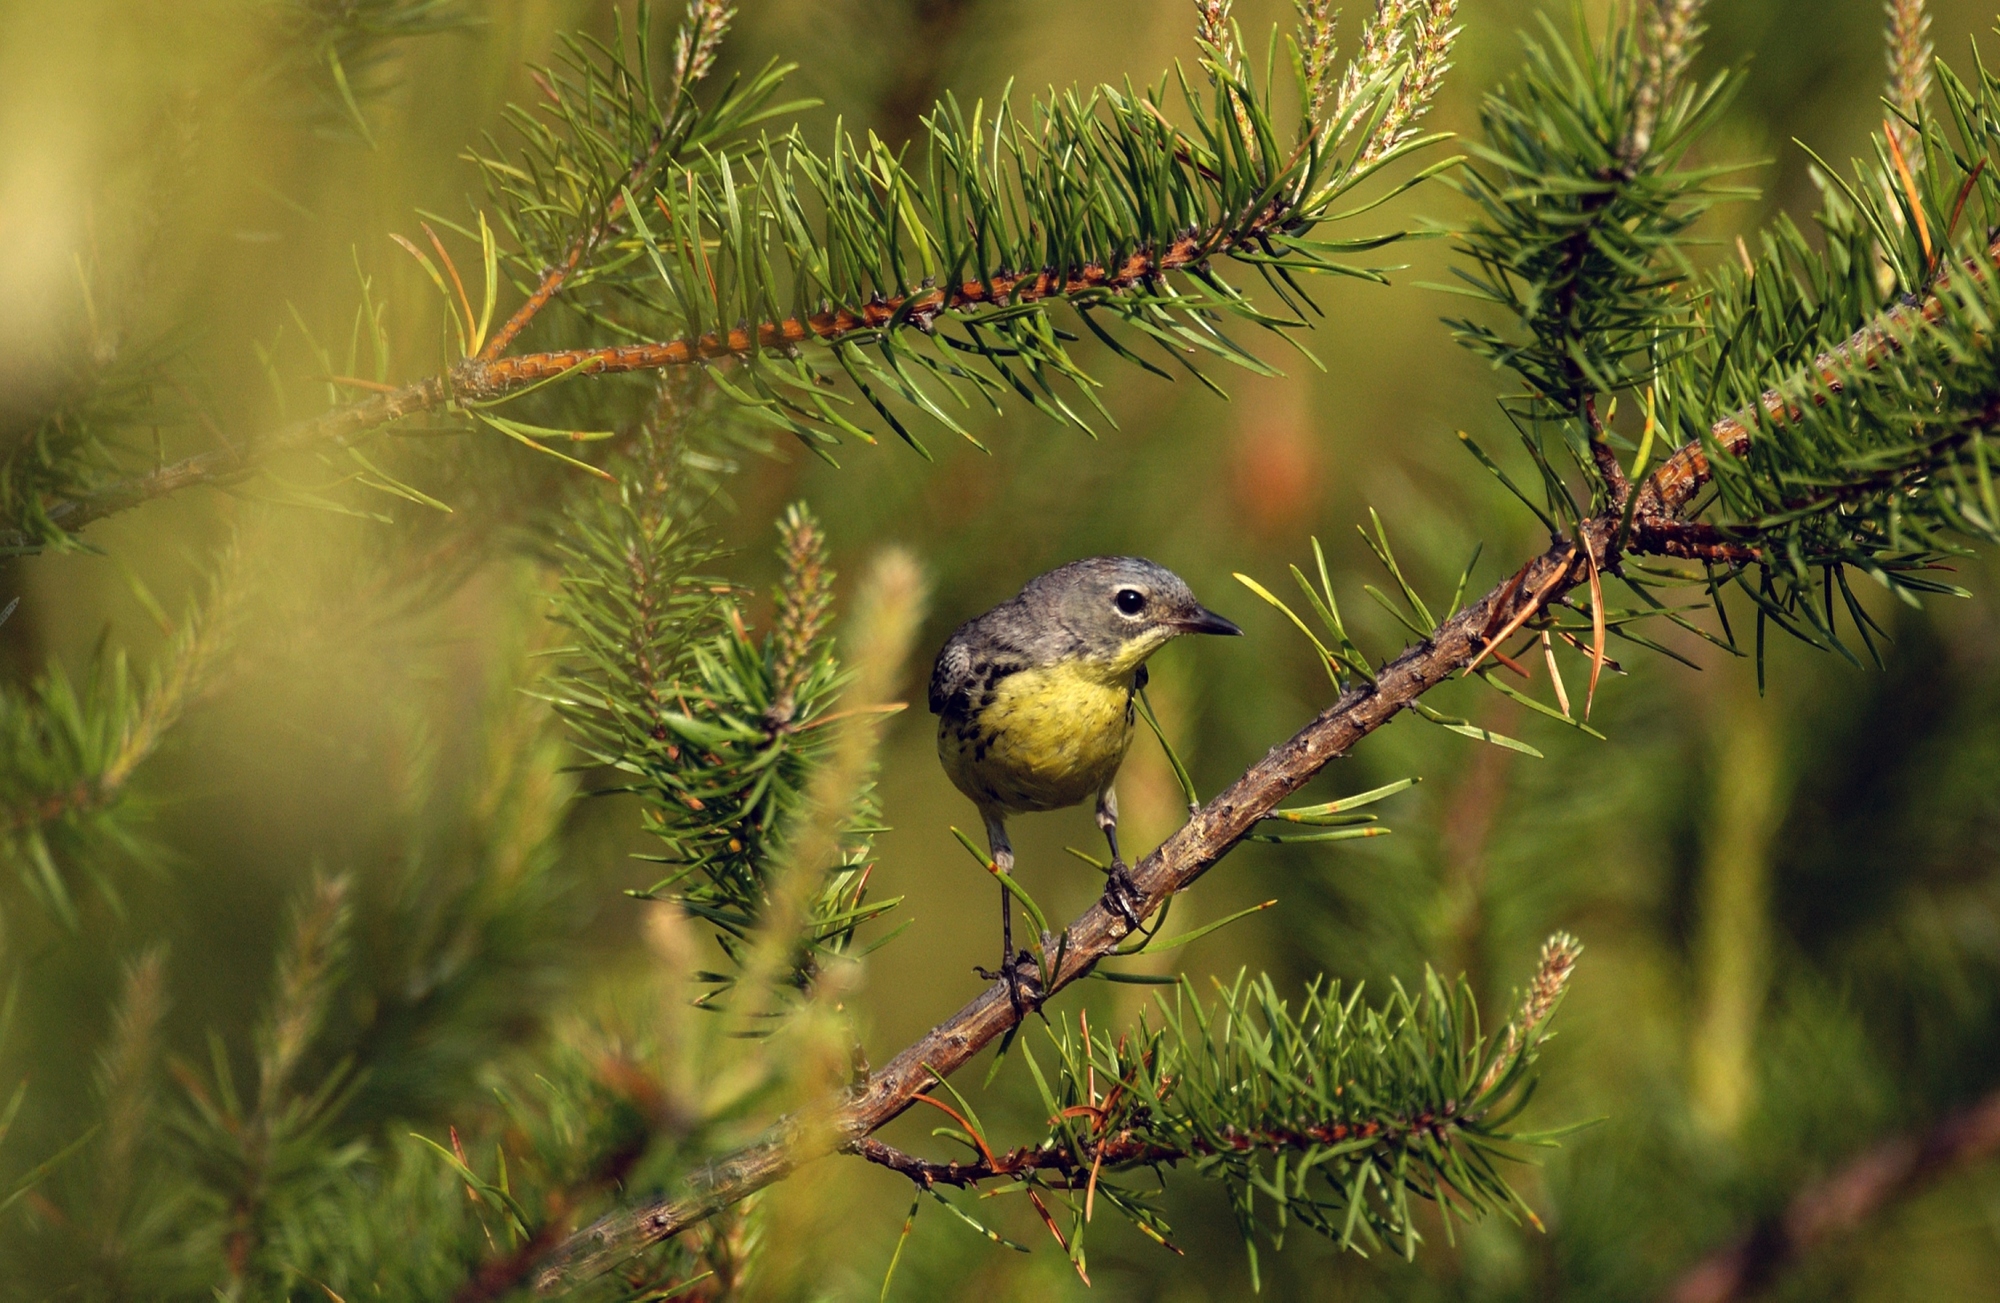 The recovery of the Kirtland’s warbler, a rare songbird that’s primarily unique to Michigan, is one of the successes of the Nongame Wildlife Fund.